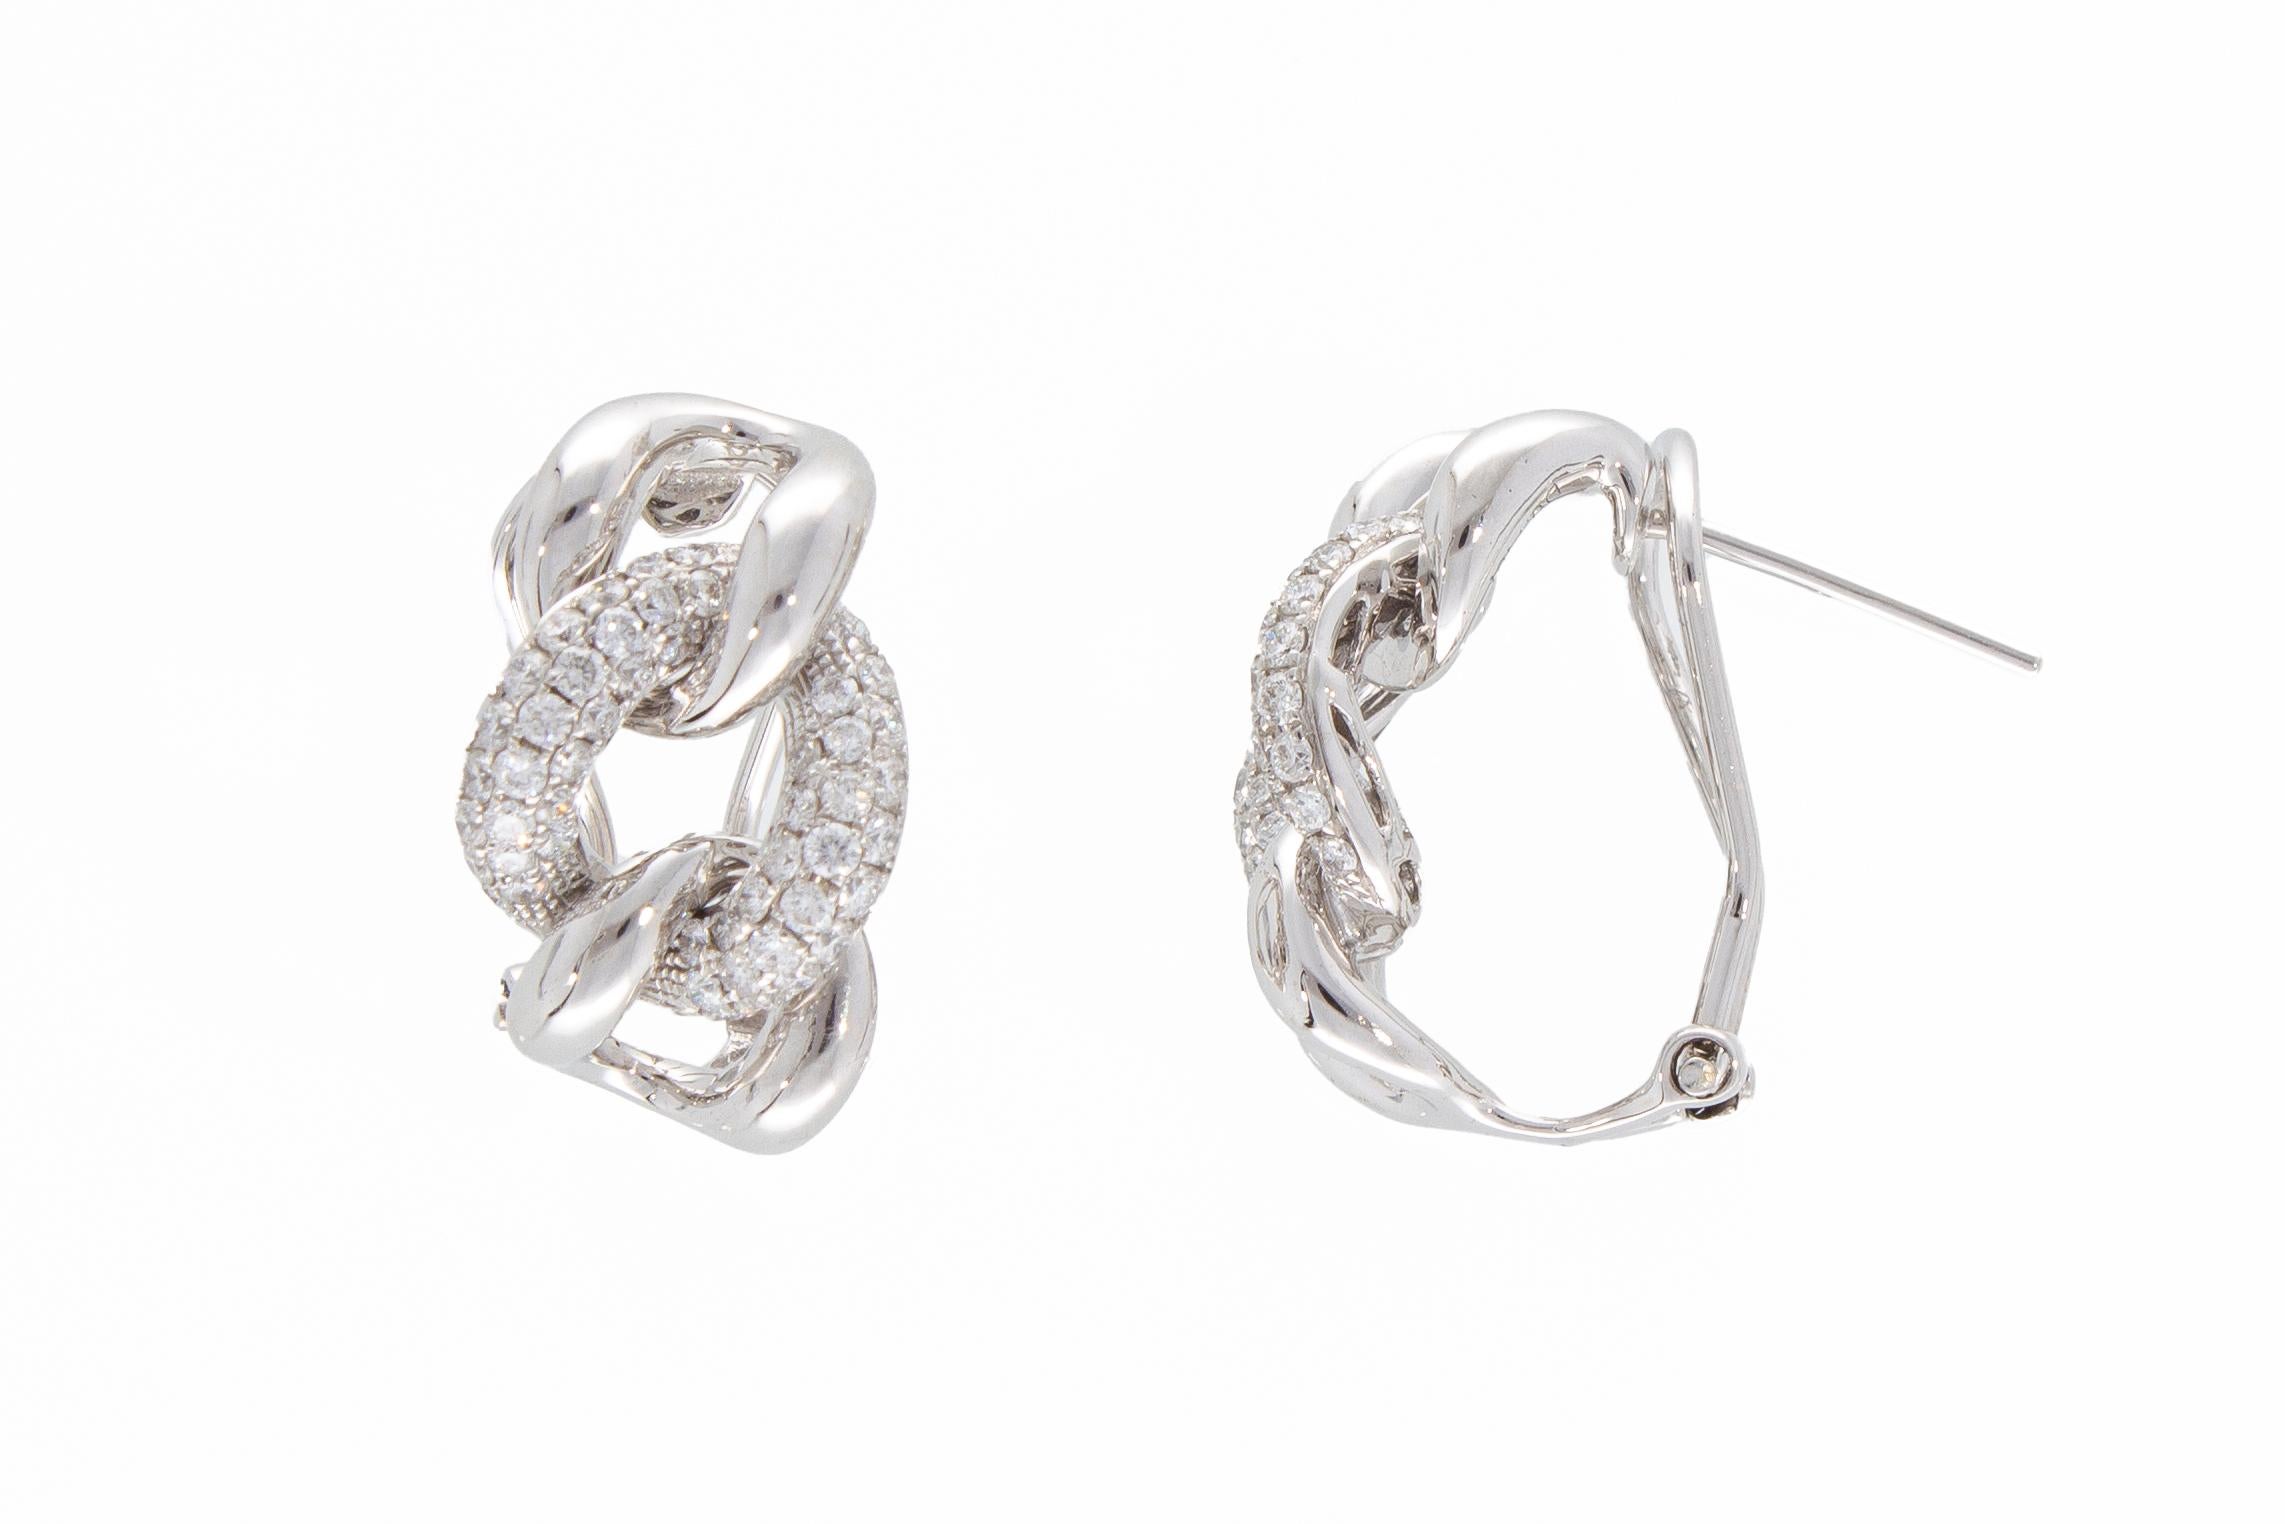 The earrings are each made up of three chain links, groumette model. 
The central links are set with diamonds, for a total carat weight of 0.71 ct.
The closure of the earrings has a pin and clips. 
To allow the earrings to be worn even by those who